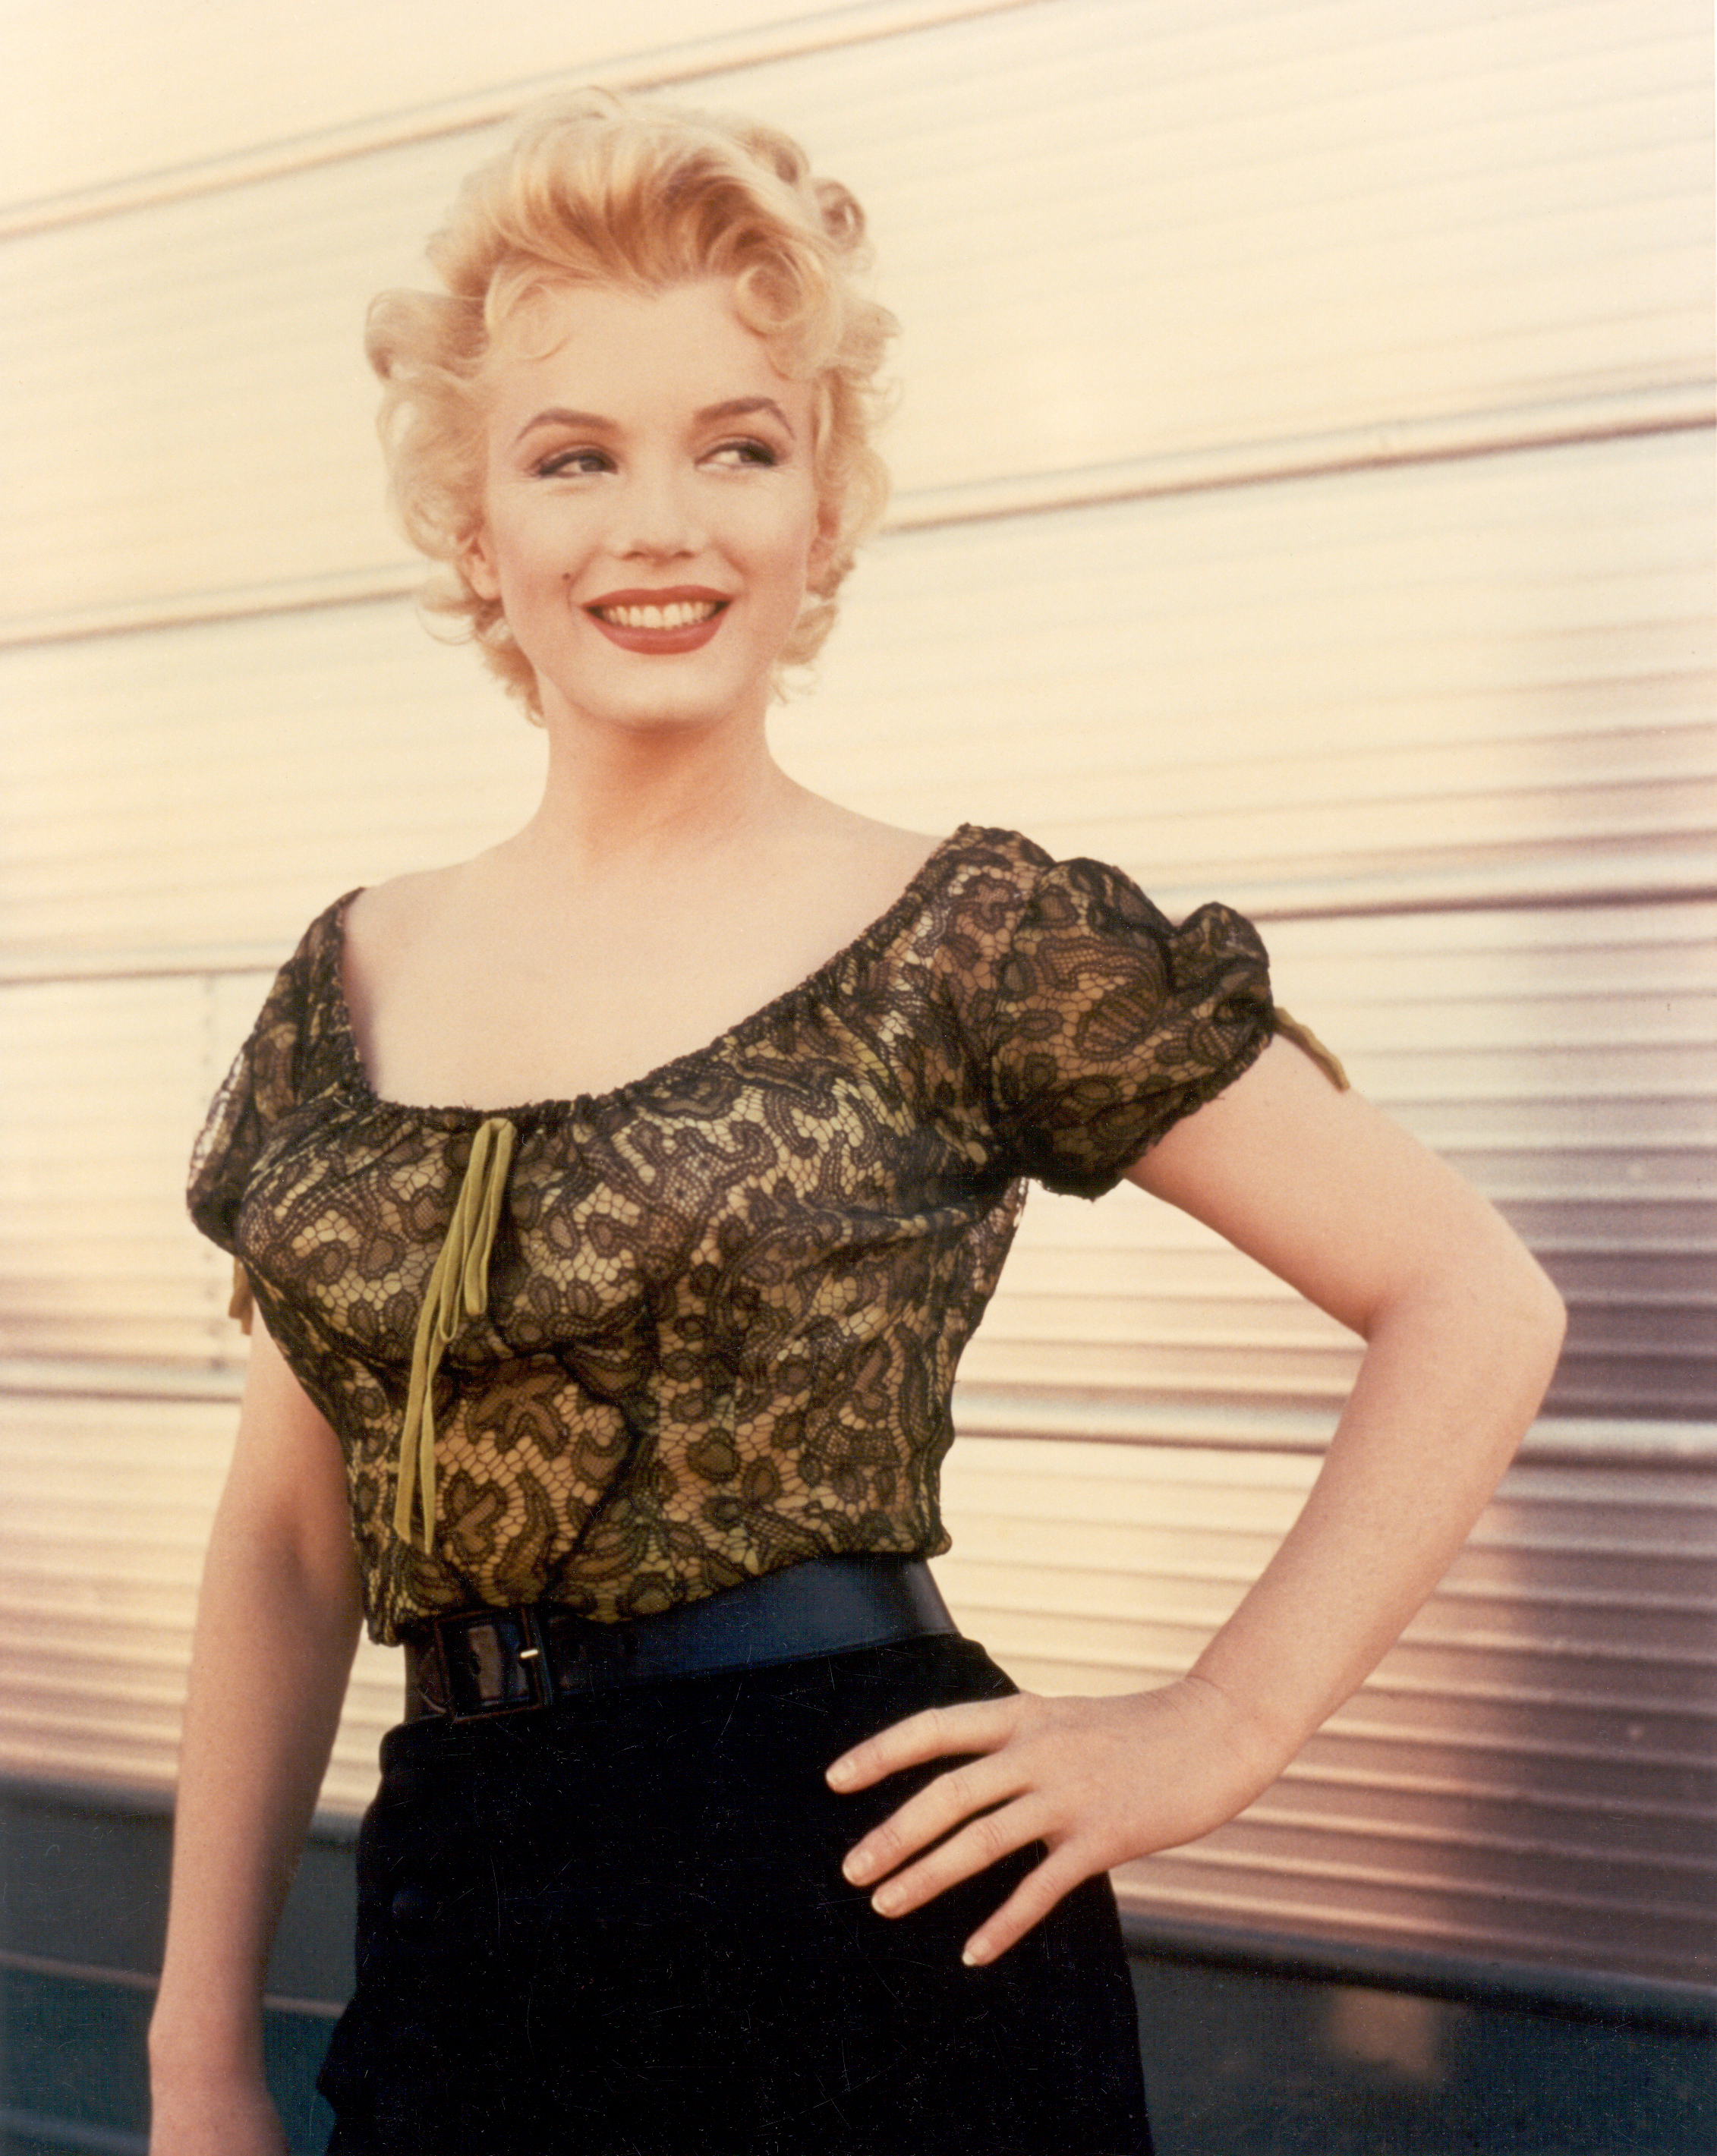 Marilyn Monroe  in a scene from "Bus Stop" in 1956 | Source: Getty Images